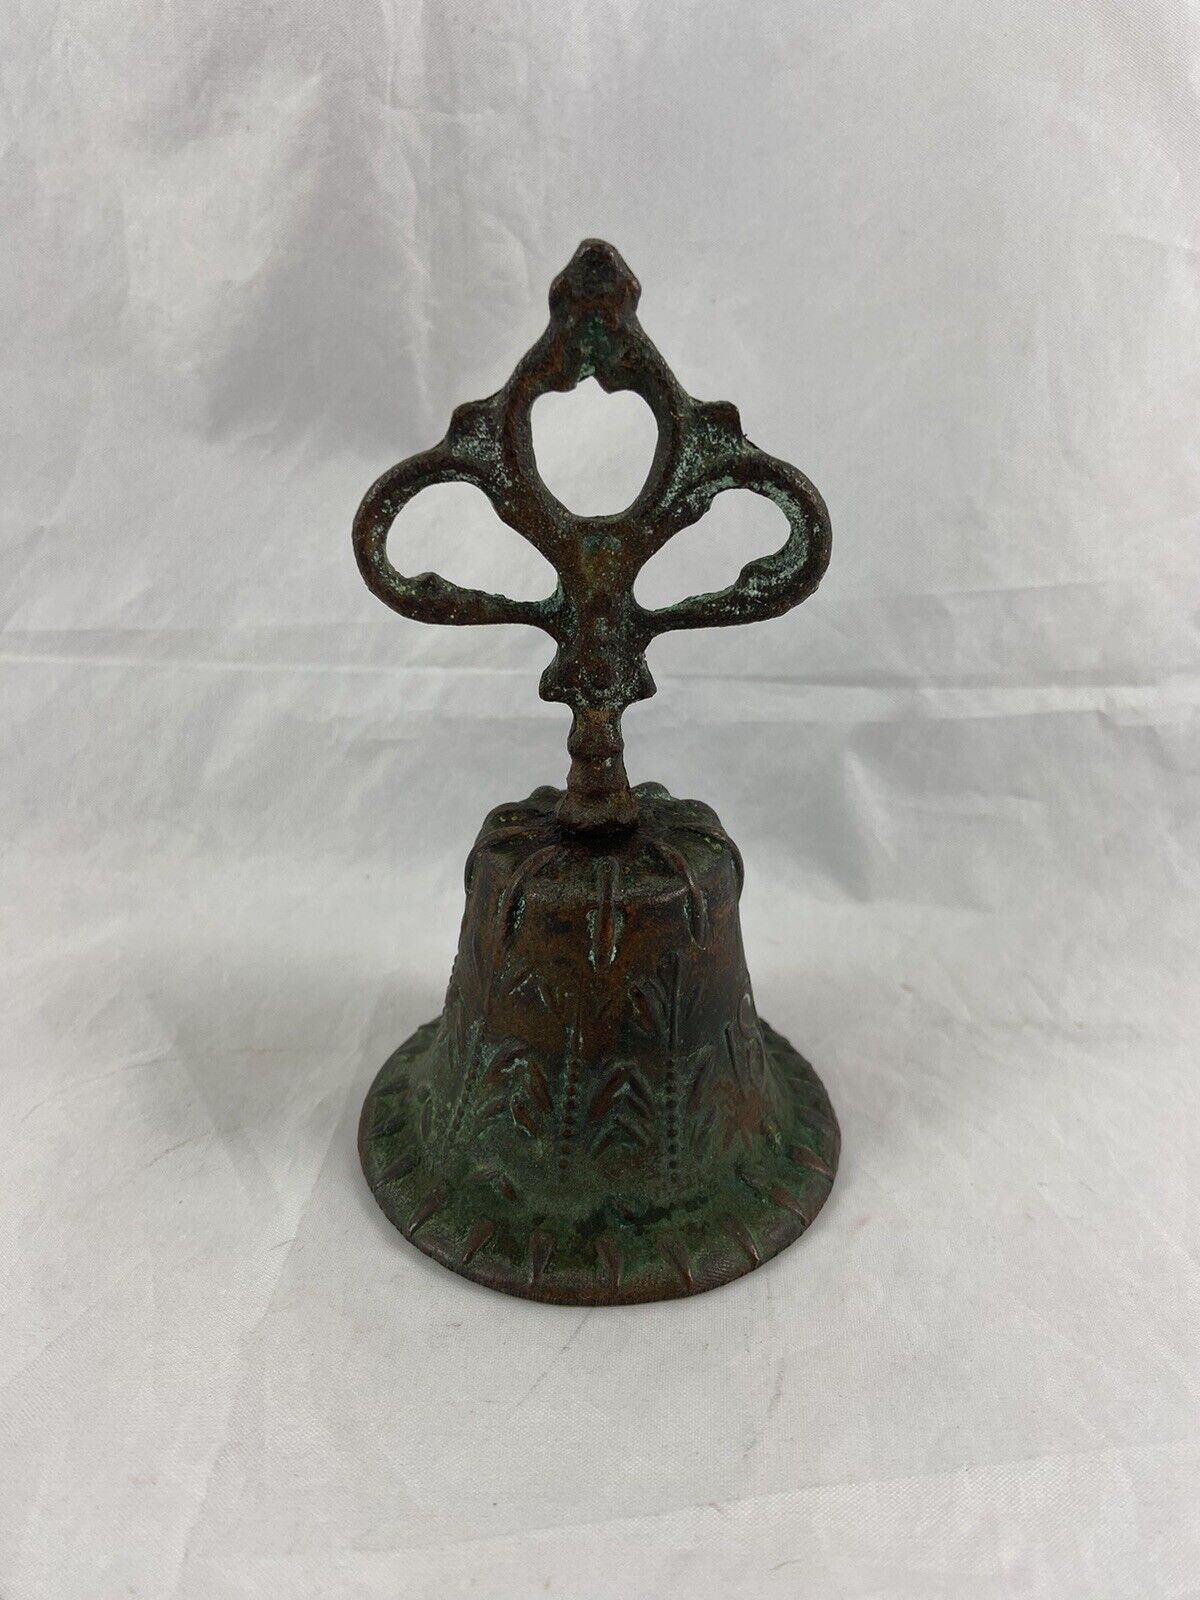 Antique 1811 Bronze Montesary Bell In Working Condition. Weighs 11.4 Oz. 5.25”